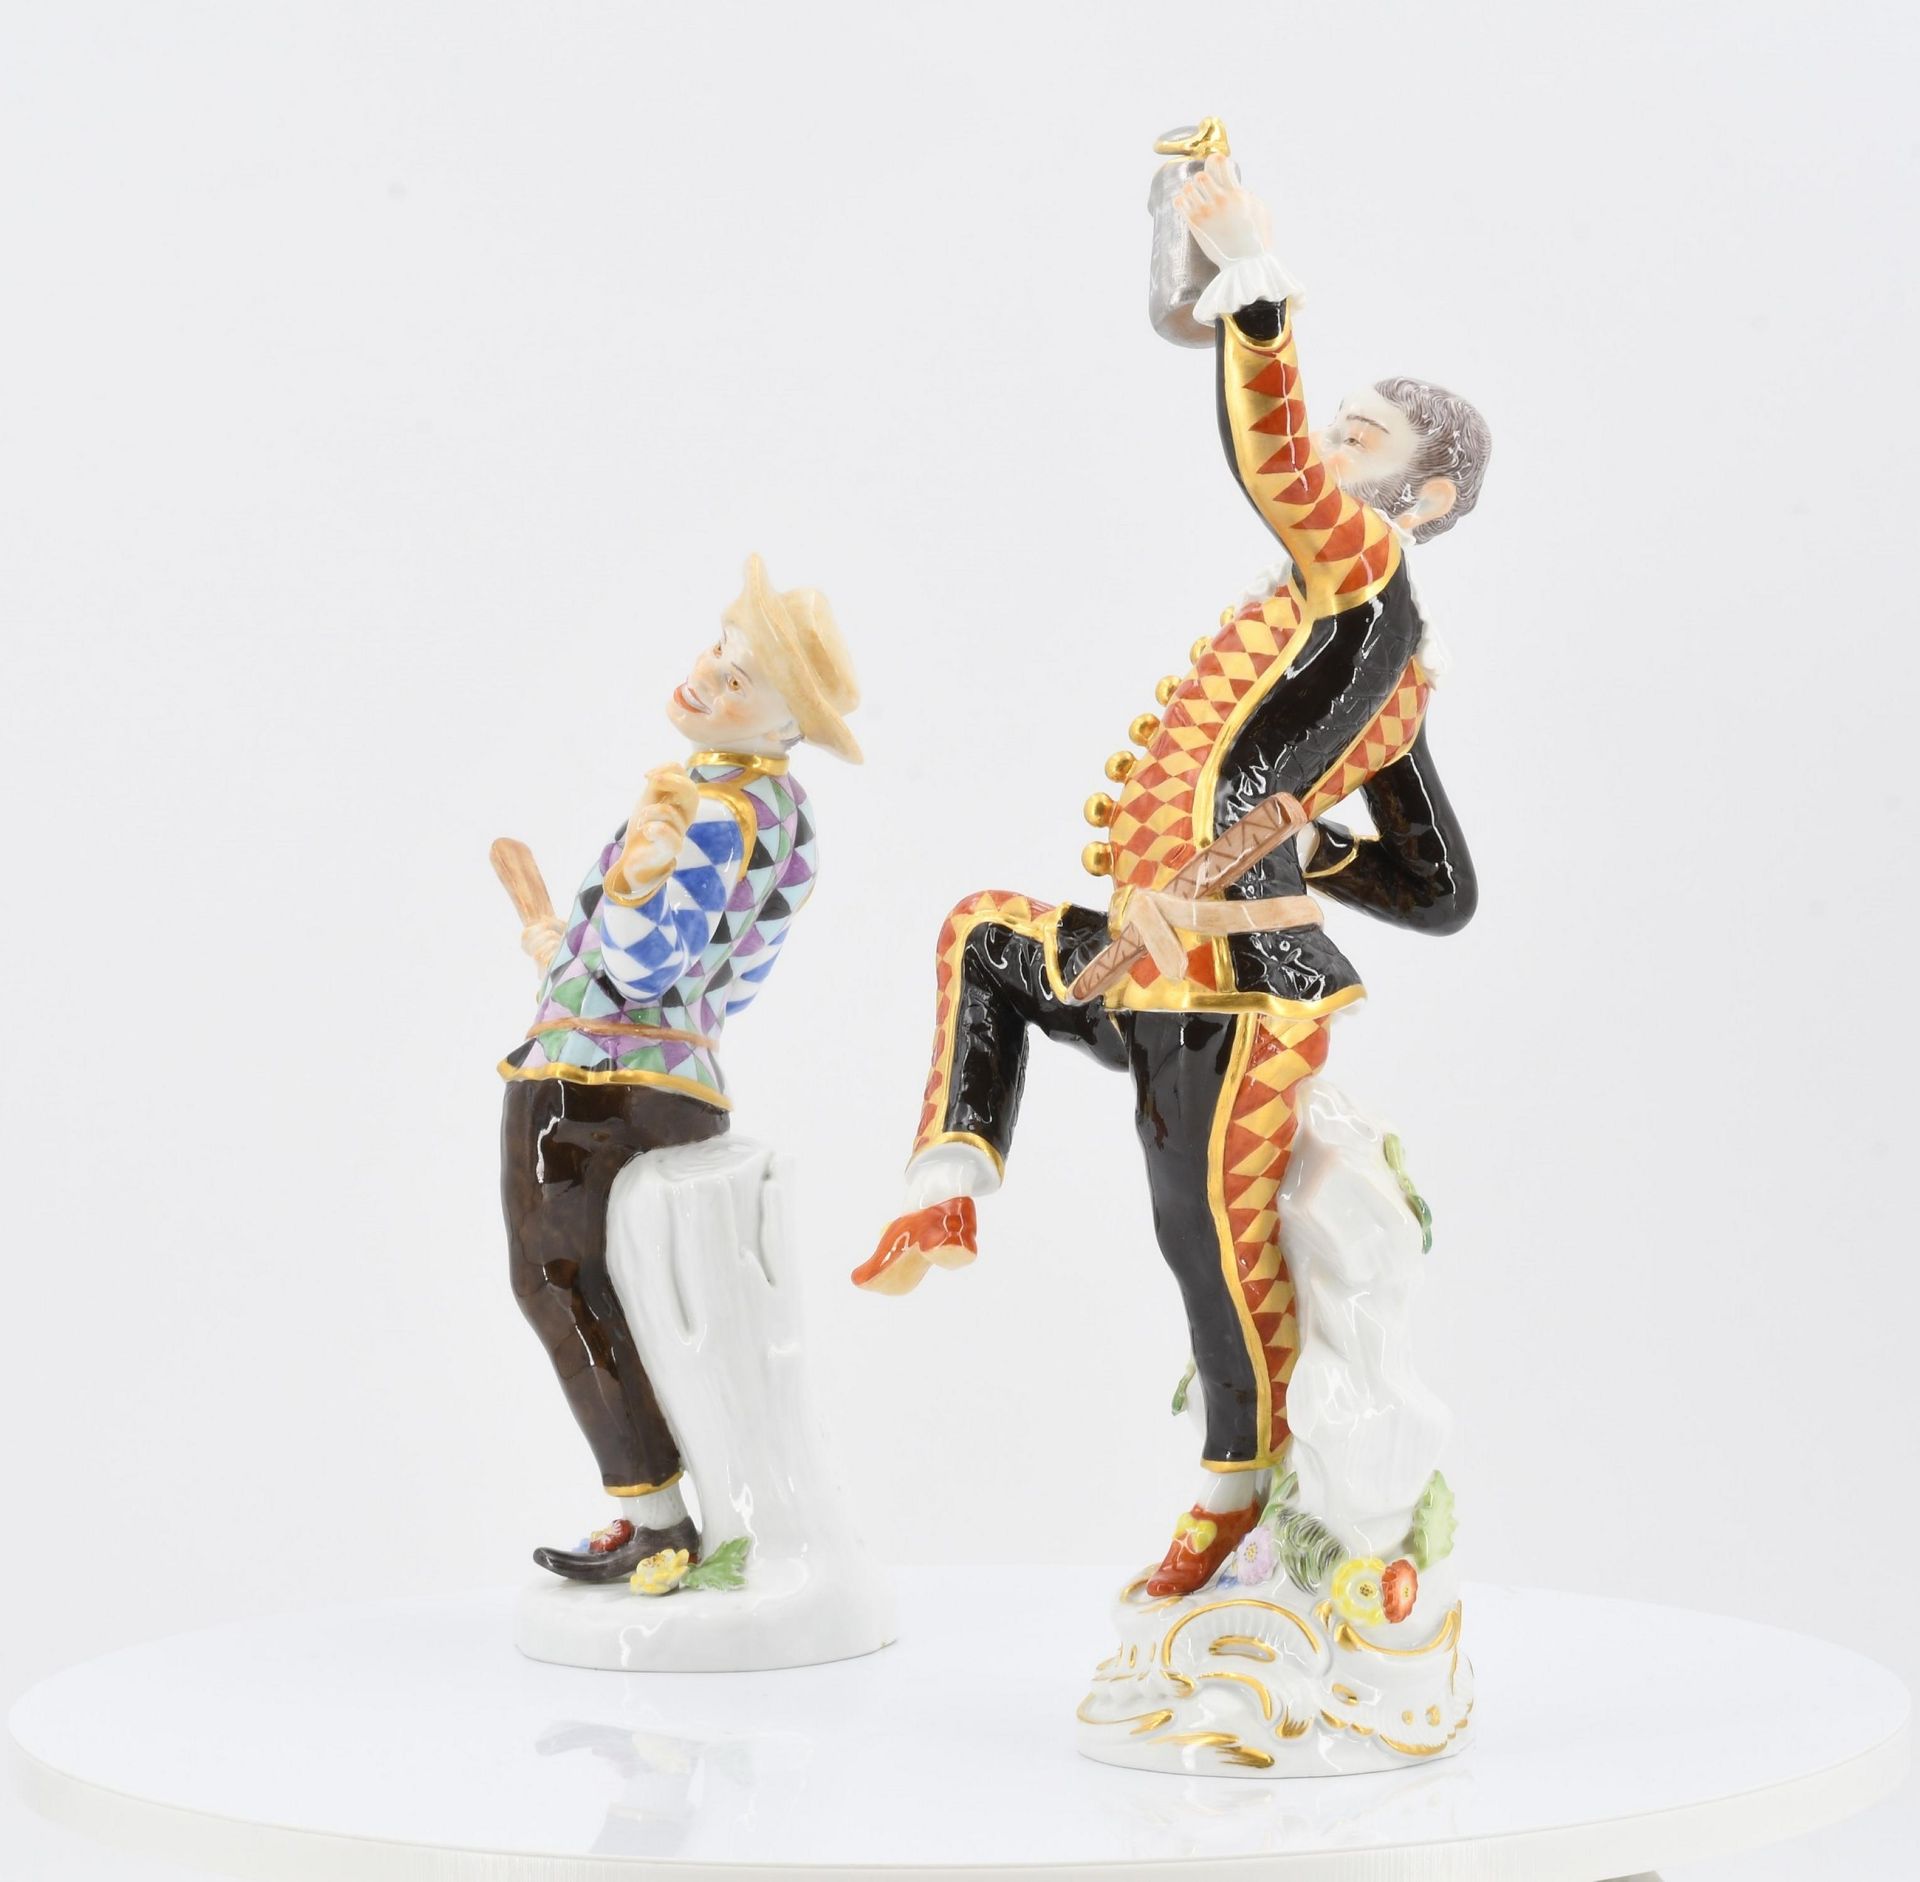 Harlequin with jug and Harlequin with slapstick from the Commedia dell'Arte - Image 3 of 6